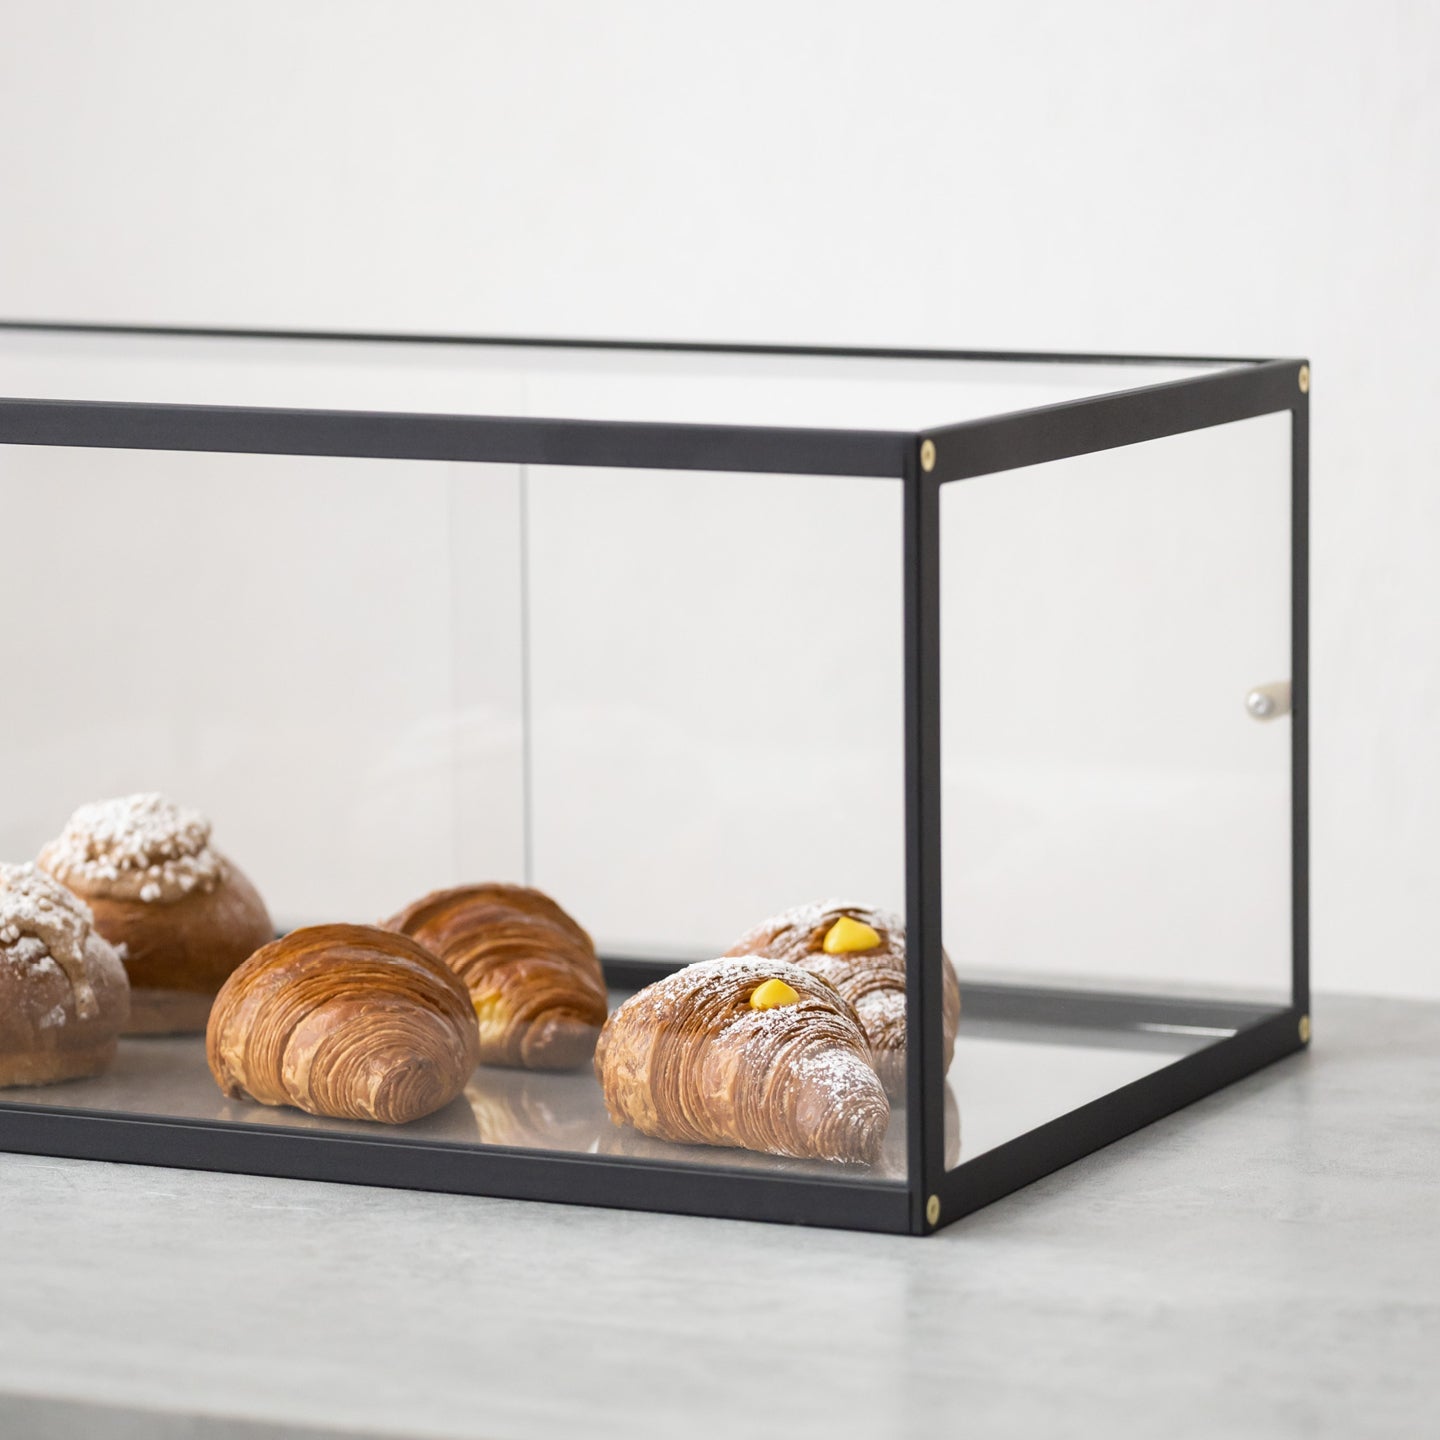  Bakery Glass, Retail Display Case, Bakery Cabinet, Pastry Display Case